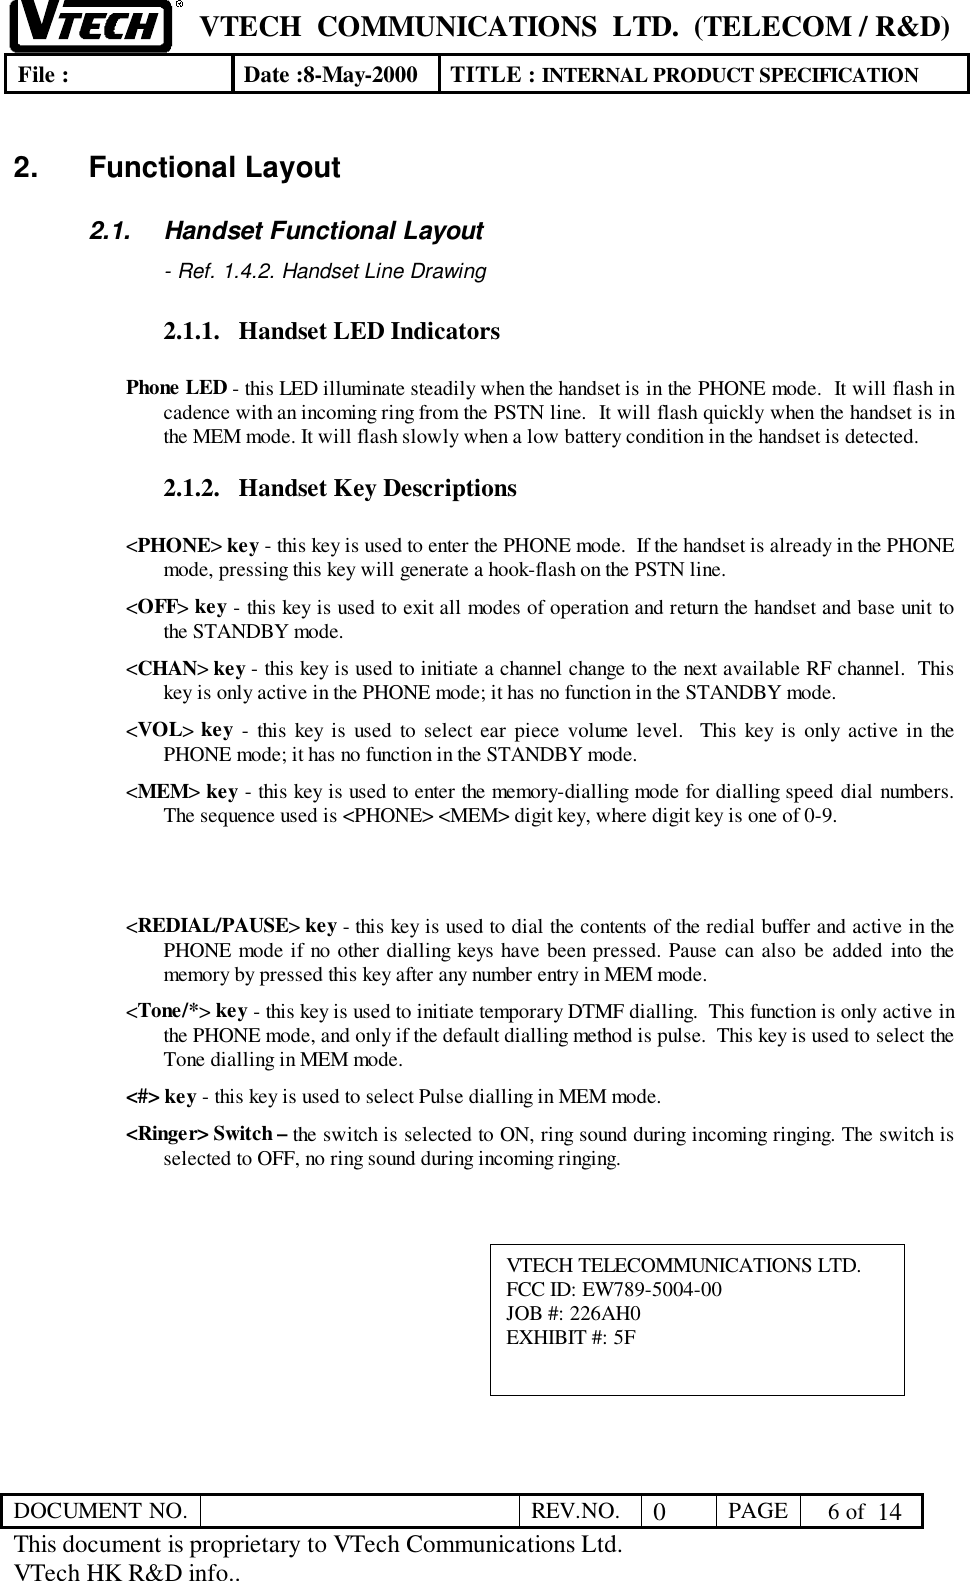 VTECH  COMMUNICATIONS  LTD.  (TELECOM / R&amp;D)File : Date :8-May-2000 TITLE : INTERNAL PRODUCT SPECIFICATIONDOCUMENT NO. REV.NO. 0PAGE  6 of  14This document is proprietary to VTech Communications Ltd.VTech HK R&amp;D info..2. Functional Layout2.1.  Handset Functional Layout- Ref. 1.4.2. Handset Line Drawing2.1.1. Handset LED IndicatorsPhone LED - this LED illuminate steadily when the handset is in the PHONE mode.  It will flash incadence with an incoming ring from the PSTN line.  It will flash quickly when the handset is inthe MEM mode. It will flash slowly when a low battery condition in the handset is detected.2.1.2. Handset Key Descriptions&lt;PHONE&gt; key - this key is used to enter the PHONE mode.  If the handset is already in the PHONEmode, pressing this key will generate a hook-flash on the PSTN line.&lt;OFF&gt; key - this key is used to exit all modes of operation and return the handset and base unit tothe STANDBY mode.&lt;CHAN&gt; key - this key is used to initiate a channel change to the next available RF channel.  Thiskey is only active in the PHONE mode; it has no function in the STANDBY mode.&lt;VOL&gt; key - this key is used to select ear piece volume level.  This key is only active in thePHONE mode; it has no function in the STANDBY mode.&lt;MEM&gt; key - this key is used to enter the memory-dialling mode for dialling speed dial numbers.The sequence used is &lt;PHONE&gt; &lt;MEM&gt; digit key, where digit key is one of 0-9.&lt;REDIAL/PAUSE&gt; key - this key is used to dial the contents of the redial buffer and active in thePHONE mode if no other dialling keys have been pressed. Pause can also be added into thememory by pressed this key after any number entry in MEM mode.&lt;Tone/*&gt; key - this key is used to initiate temporary DTMF dialling.  This function is only active inthe PHONE mode, and only if the default dialling method is pulse.  This key is used to select theTone dialling in MEM mode.&lt;#&gt; key - this key is used to select Pulse dialling in MEM mode.&lt;Ringer&gt; Switch – the switch is selected to ON, ring sound during incoming ringing. The switch isselected to OFF, no ring sound during incoming ringing.VTECH TELECOMMUNICATIONS LTD.FCC ID: EW789-5004-00JOB #: 226AH0EXHIBIT #: 5F